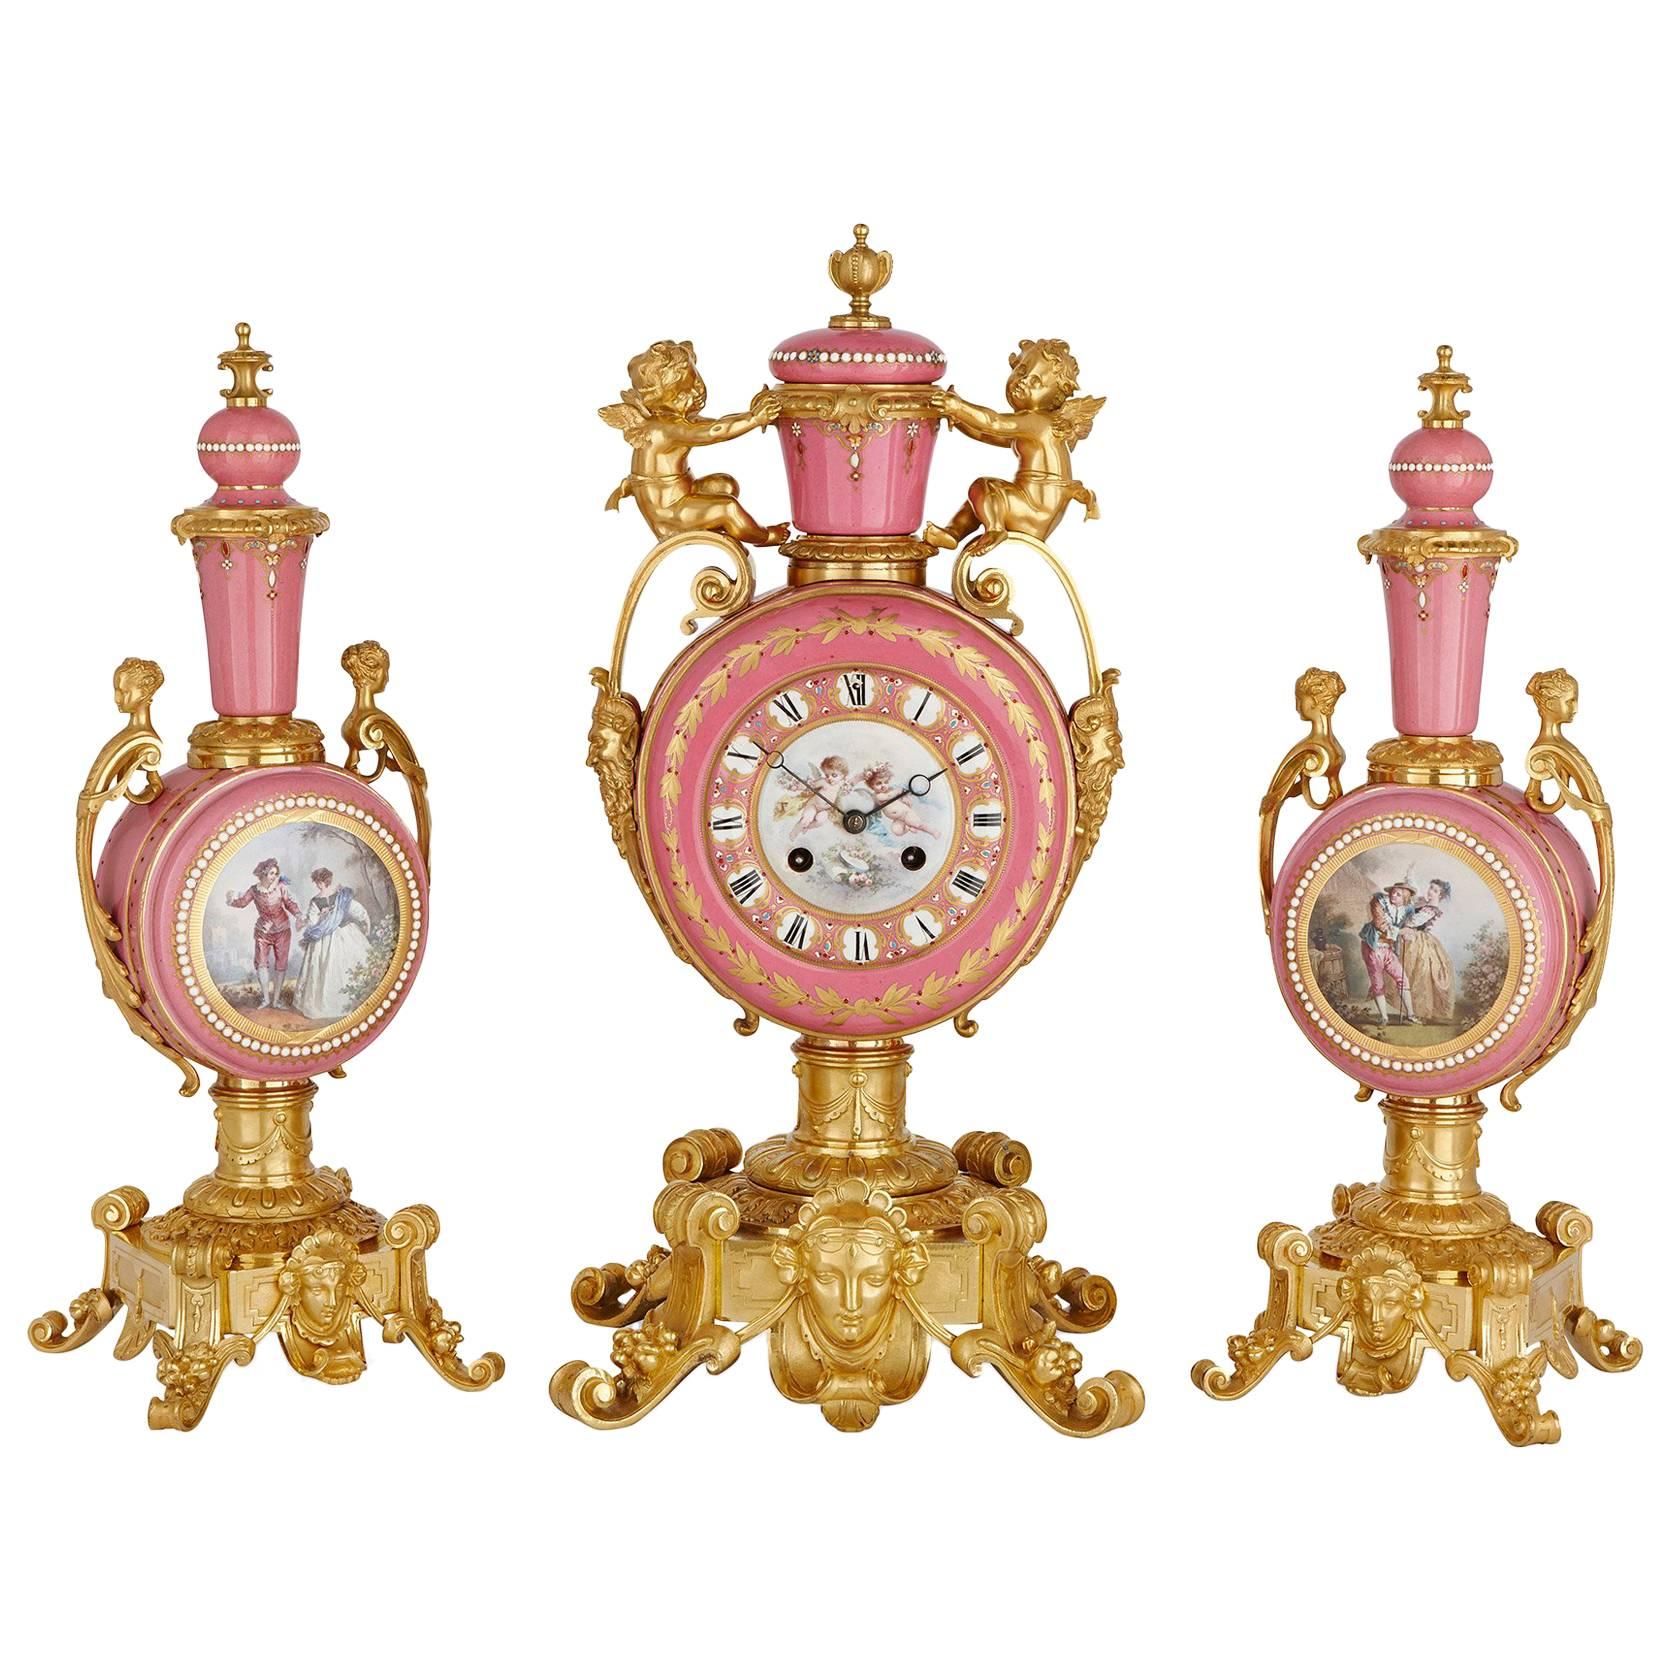 Sèvres Style Gold Ormolu and Pink Porcelain Antique French Three-Piece Clock Set For Sale